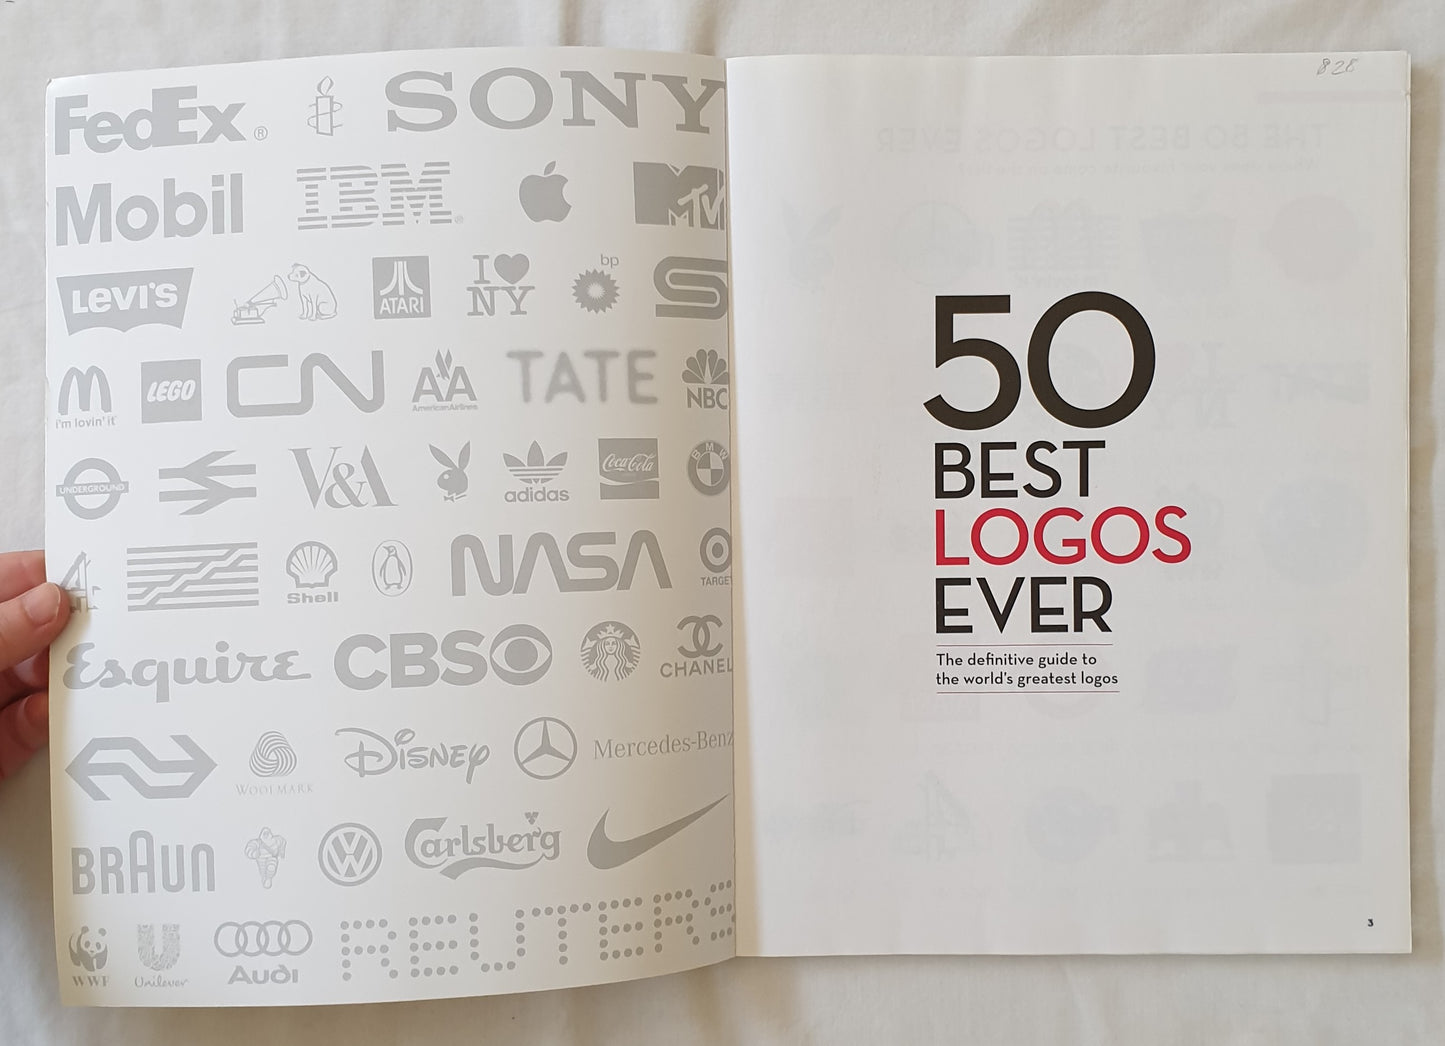 50 Best Logos Ever by Future PLC